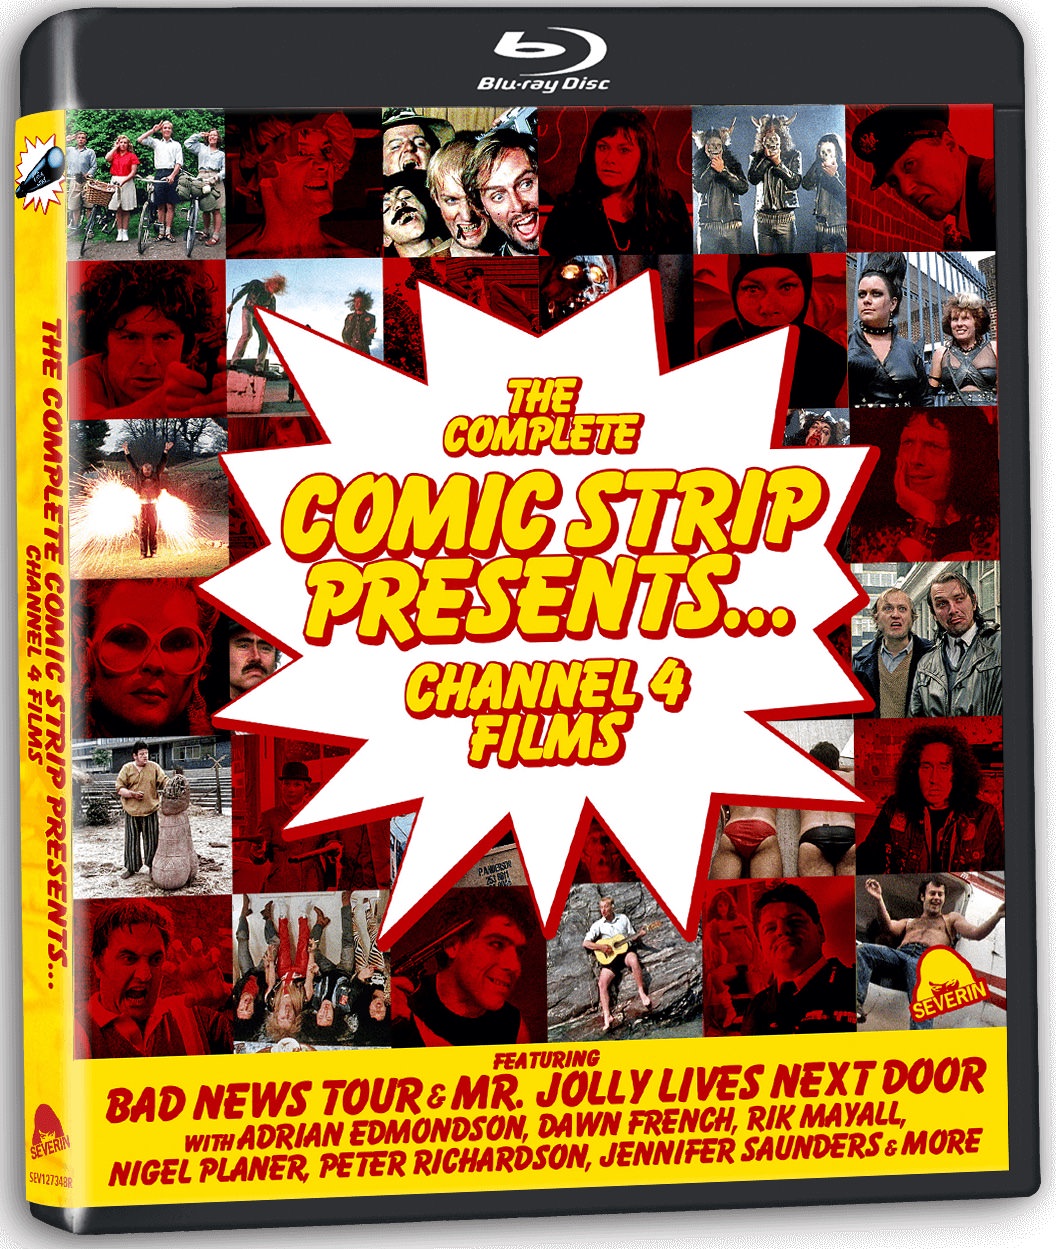 The Complete Comic Strip Presents…Channel 4 Films [3-Disc Blu-ray w/Exclusive Slipcover]